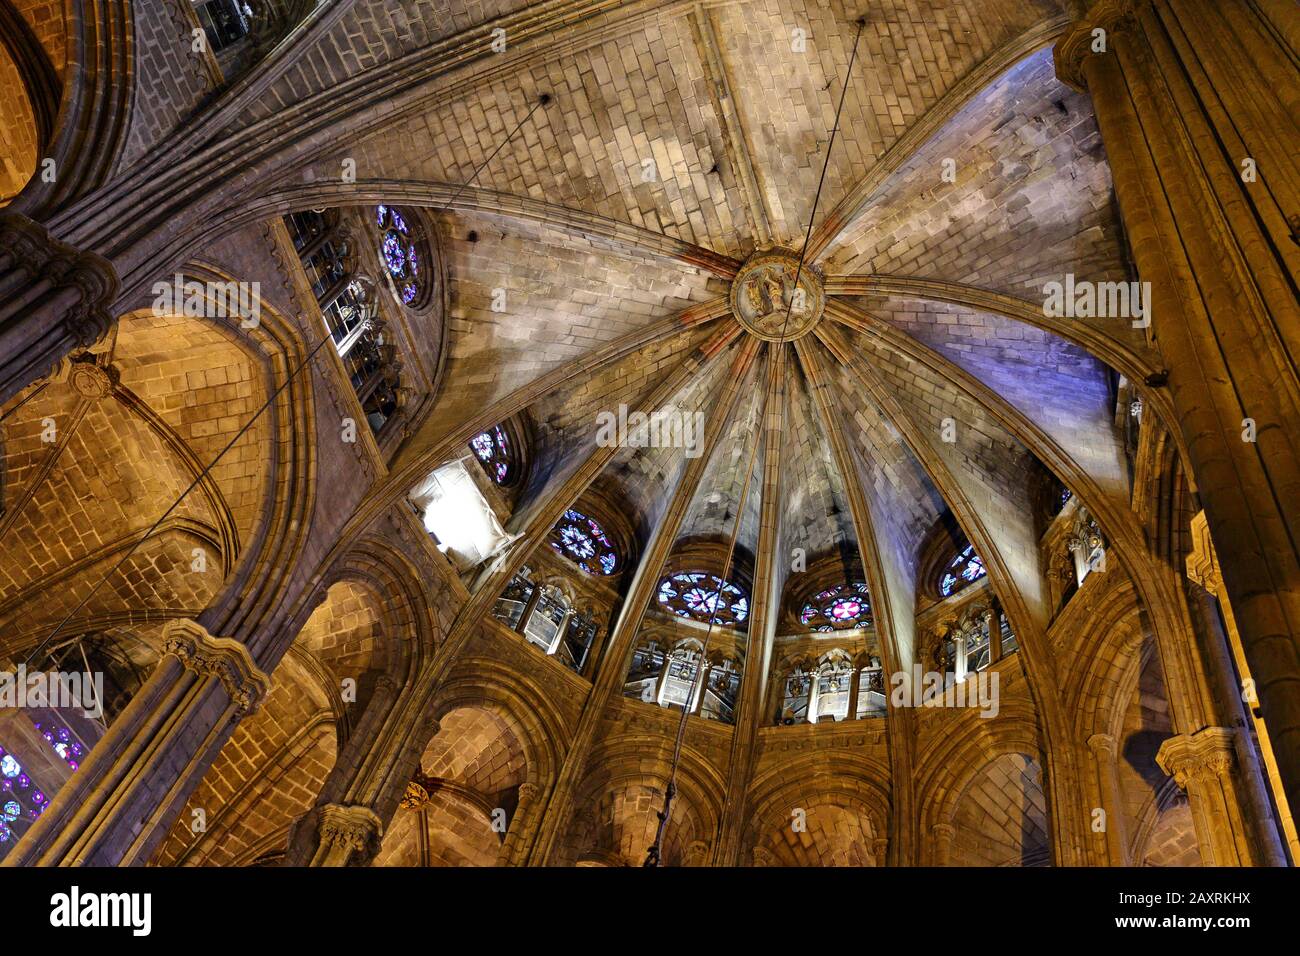 the 14th century Gothic Barcelona Cathedral (Catedral de Barcelona) where 13 geese are famously kept Stock Photo